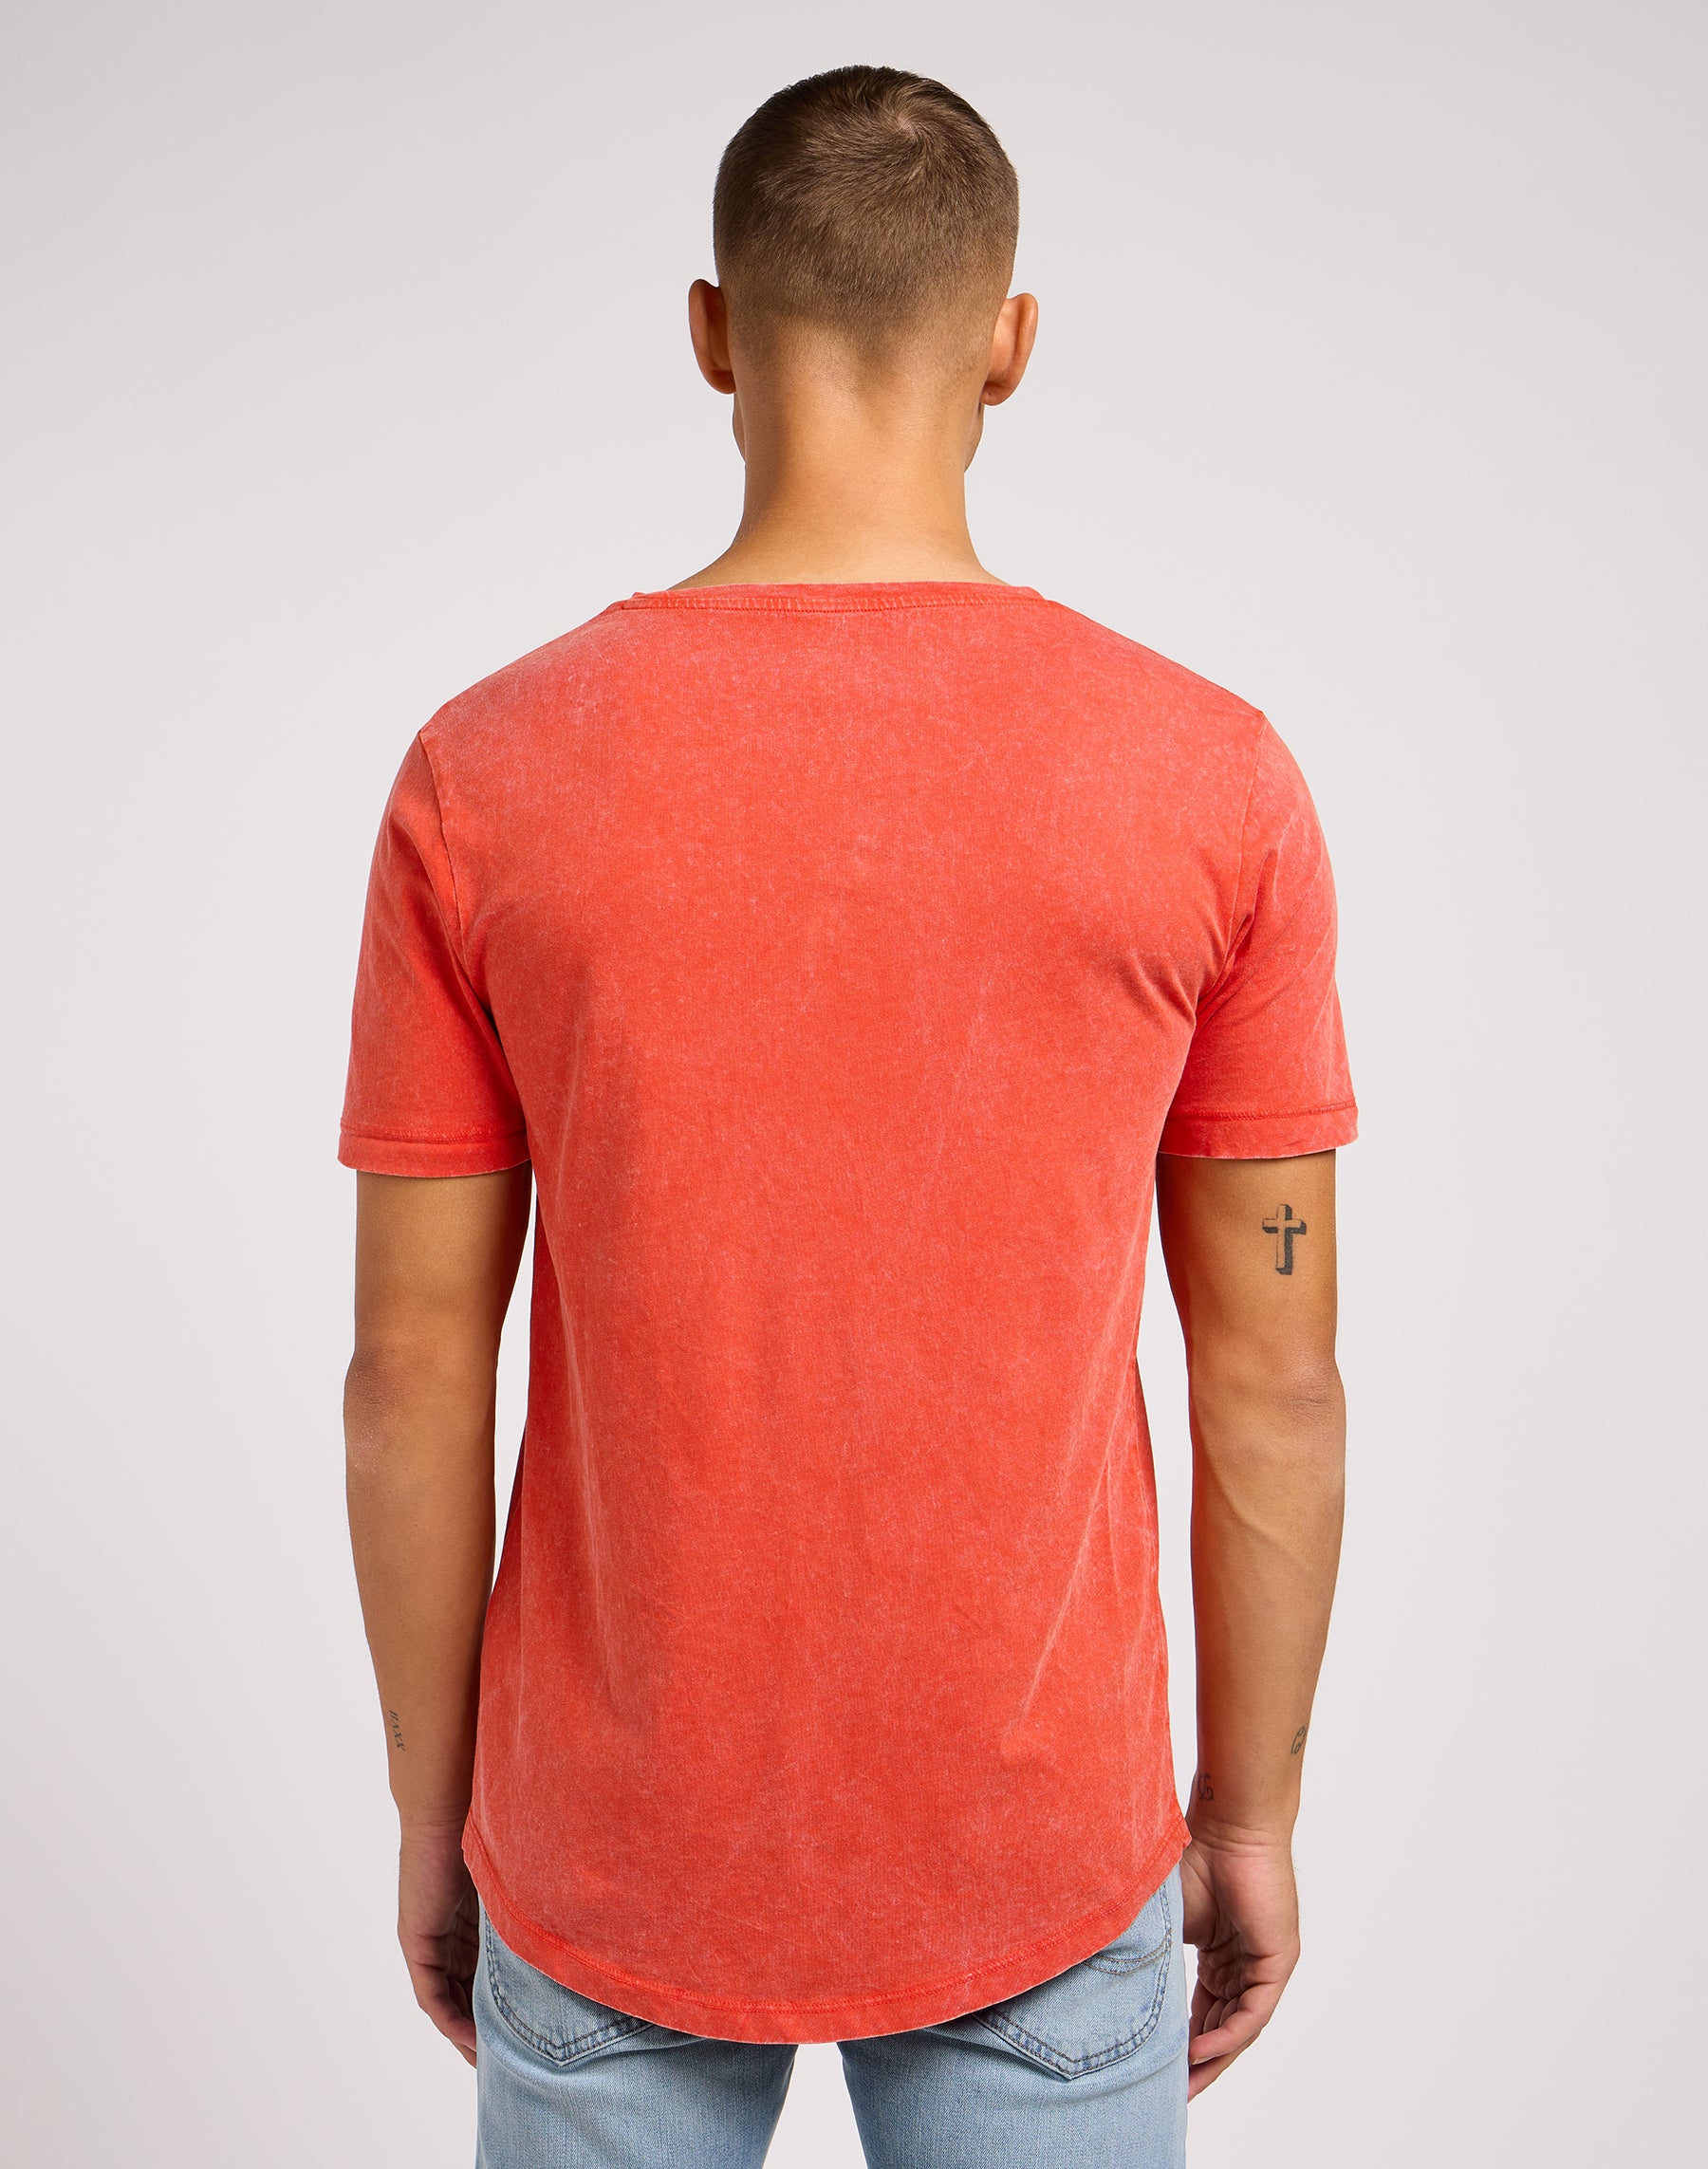 Shaped Tee in Poppy T-Shirts Lee   